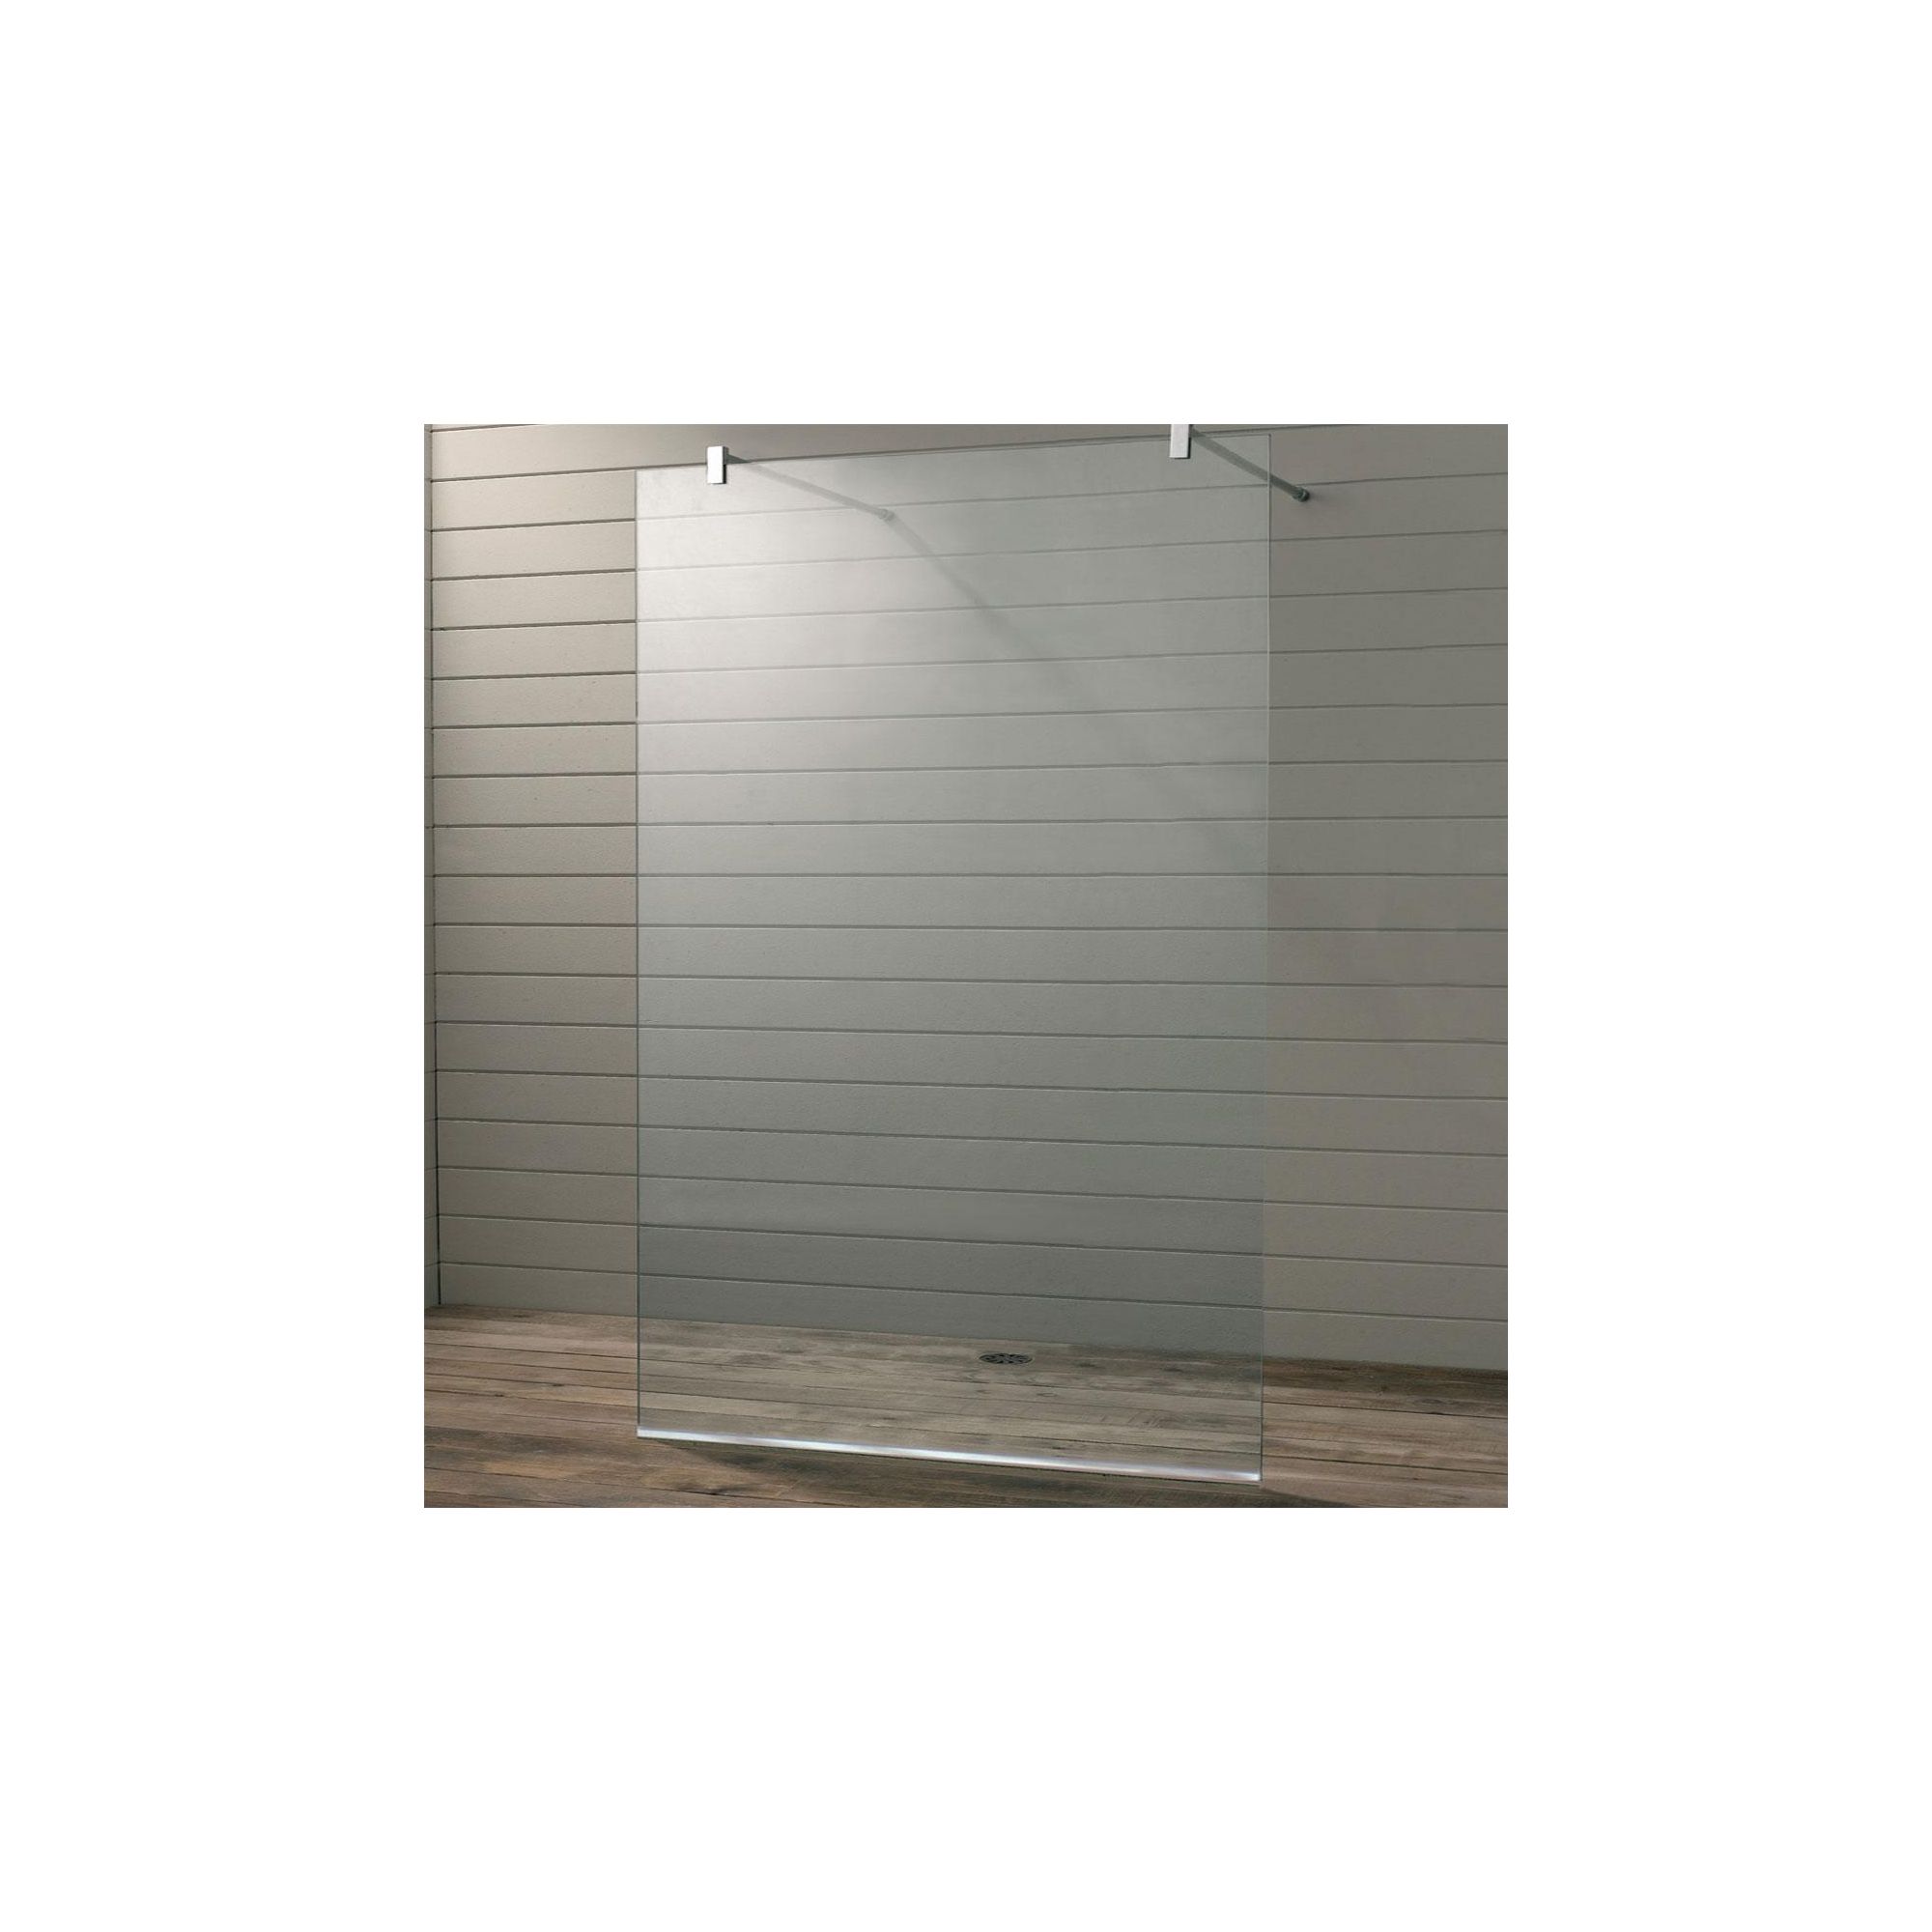 Duchy Premium Wet Room Glass Shower Panel, 800mm Wide, 10mm Glass at Tesco Direct